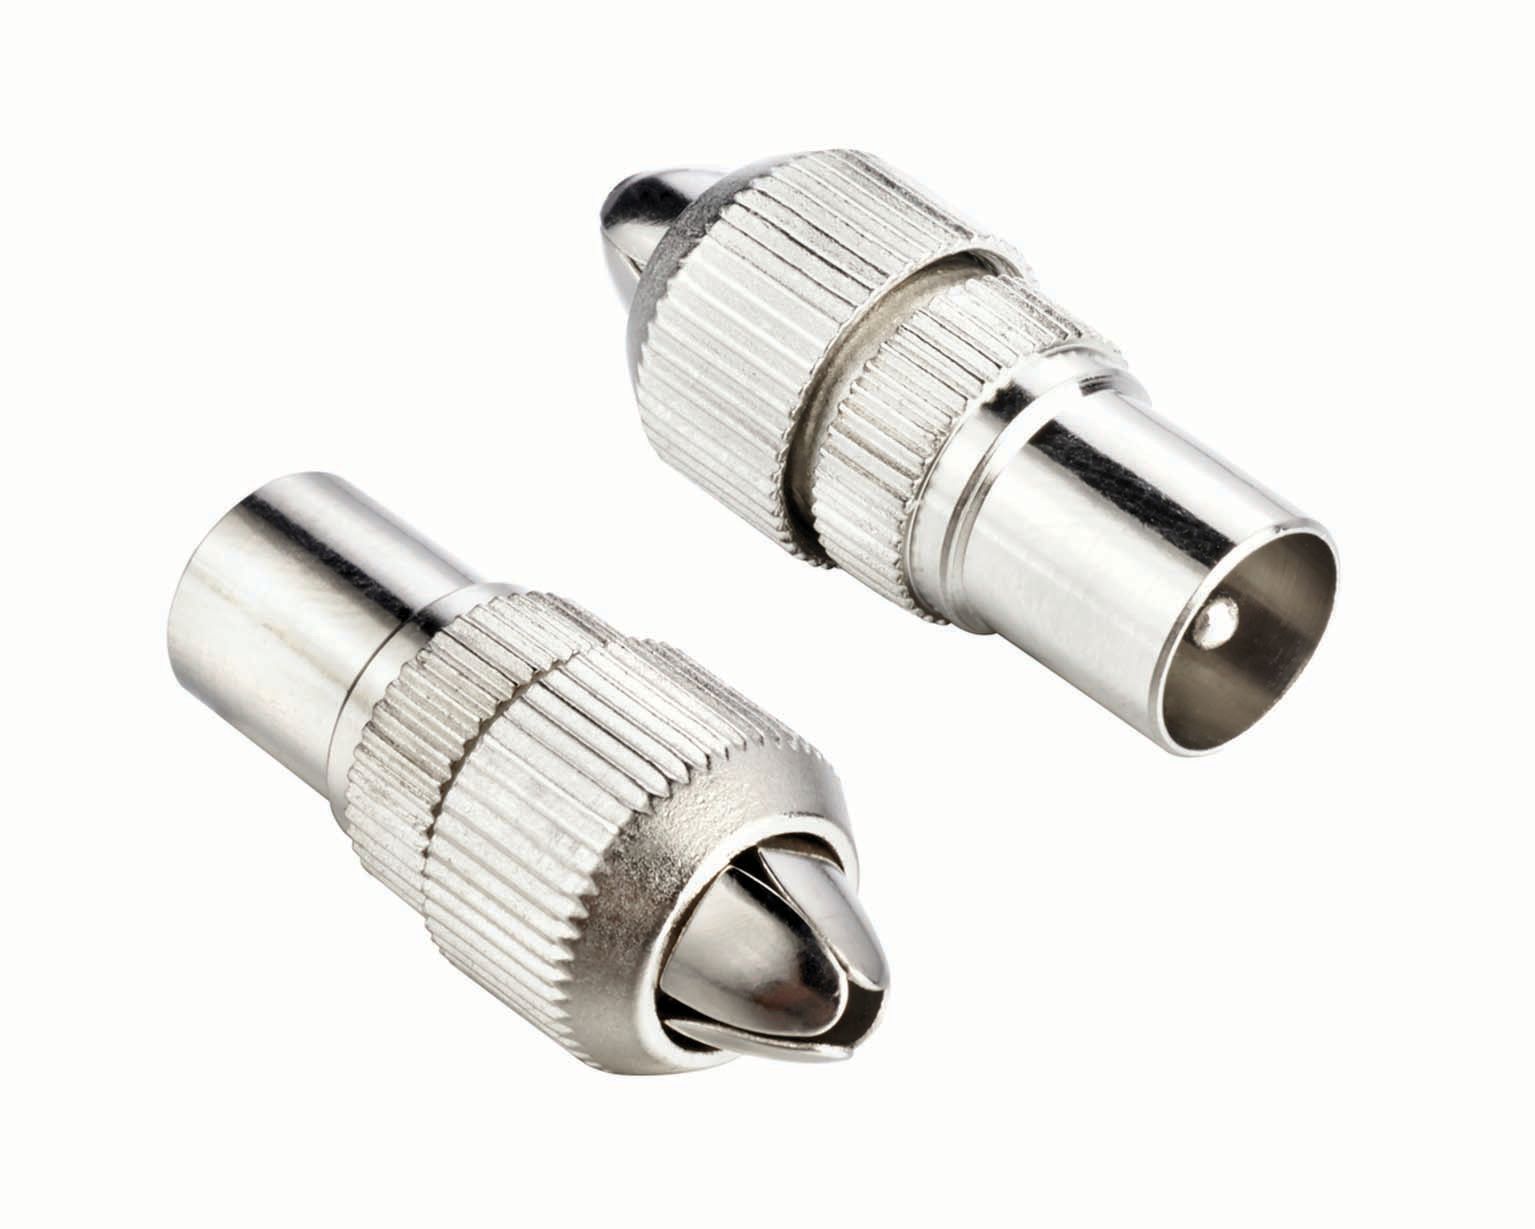 Image of Ross Coaxial Plugs - Pack of 2